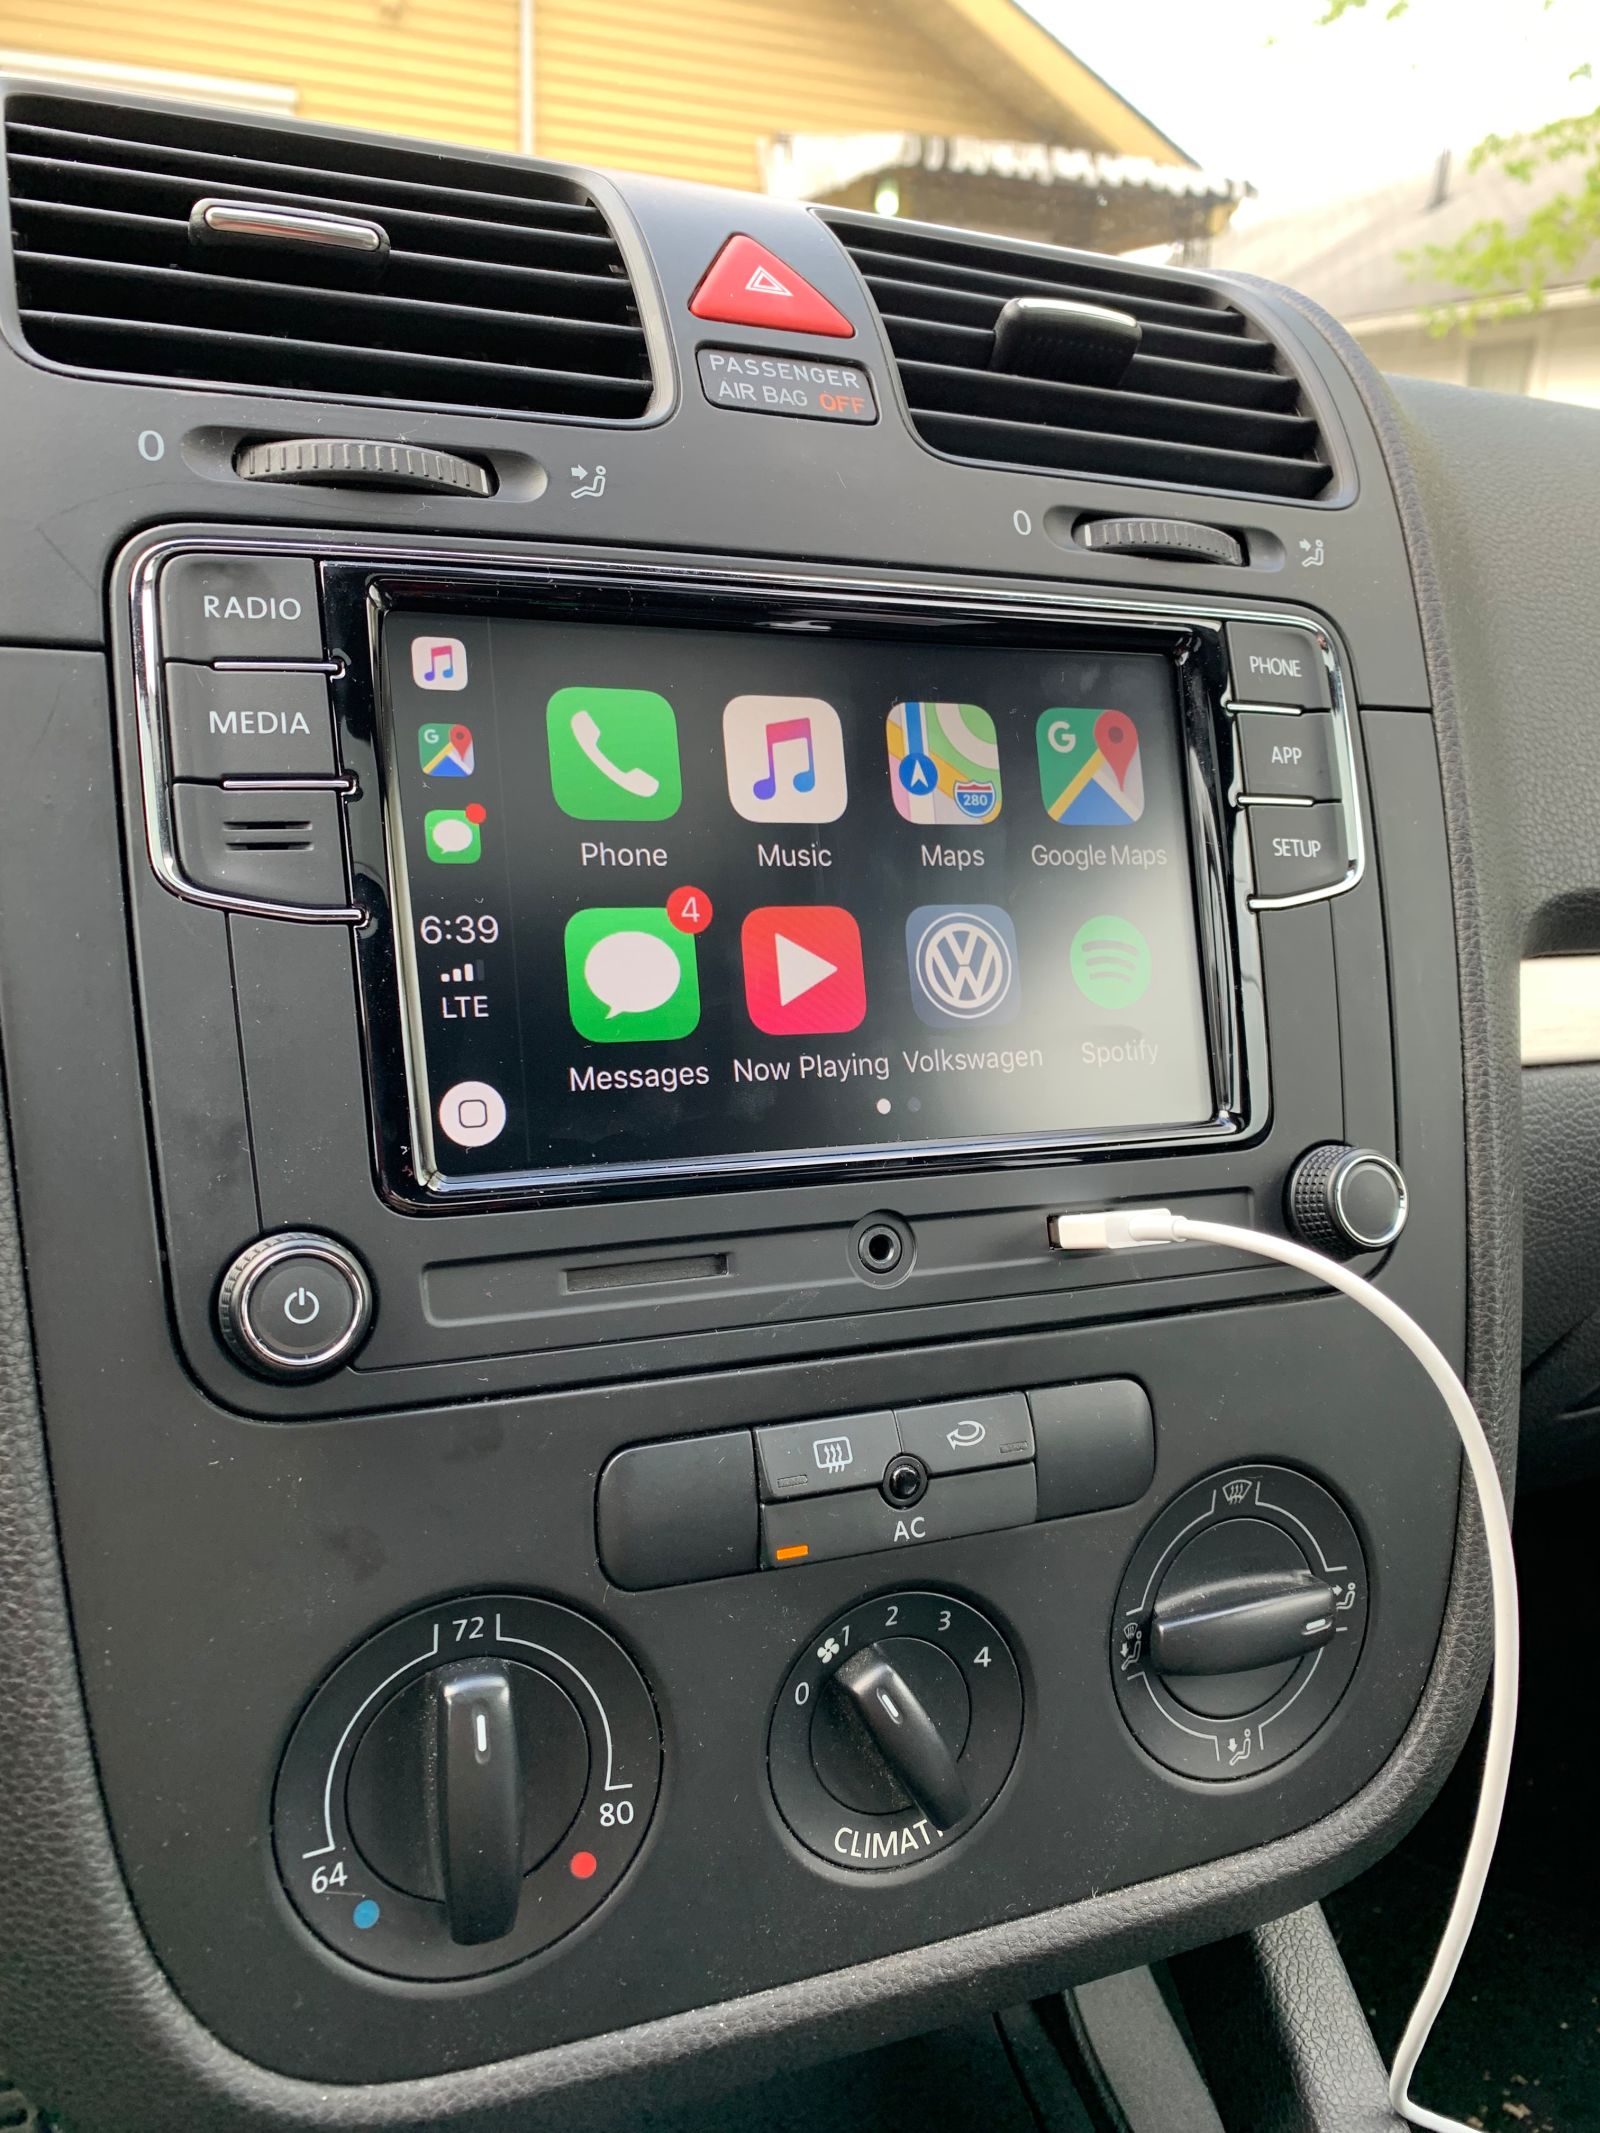 Illustration for article titled I Installed Apple CarPlay in my 2007 GTI for Less Than $200